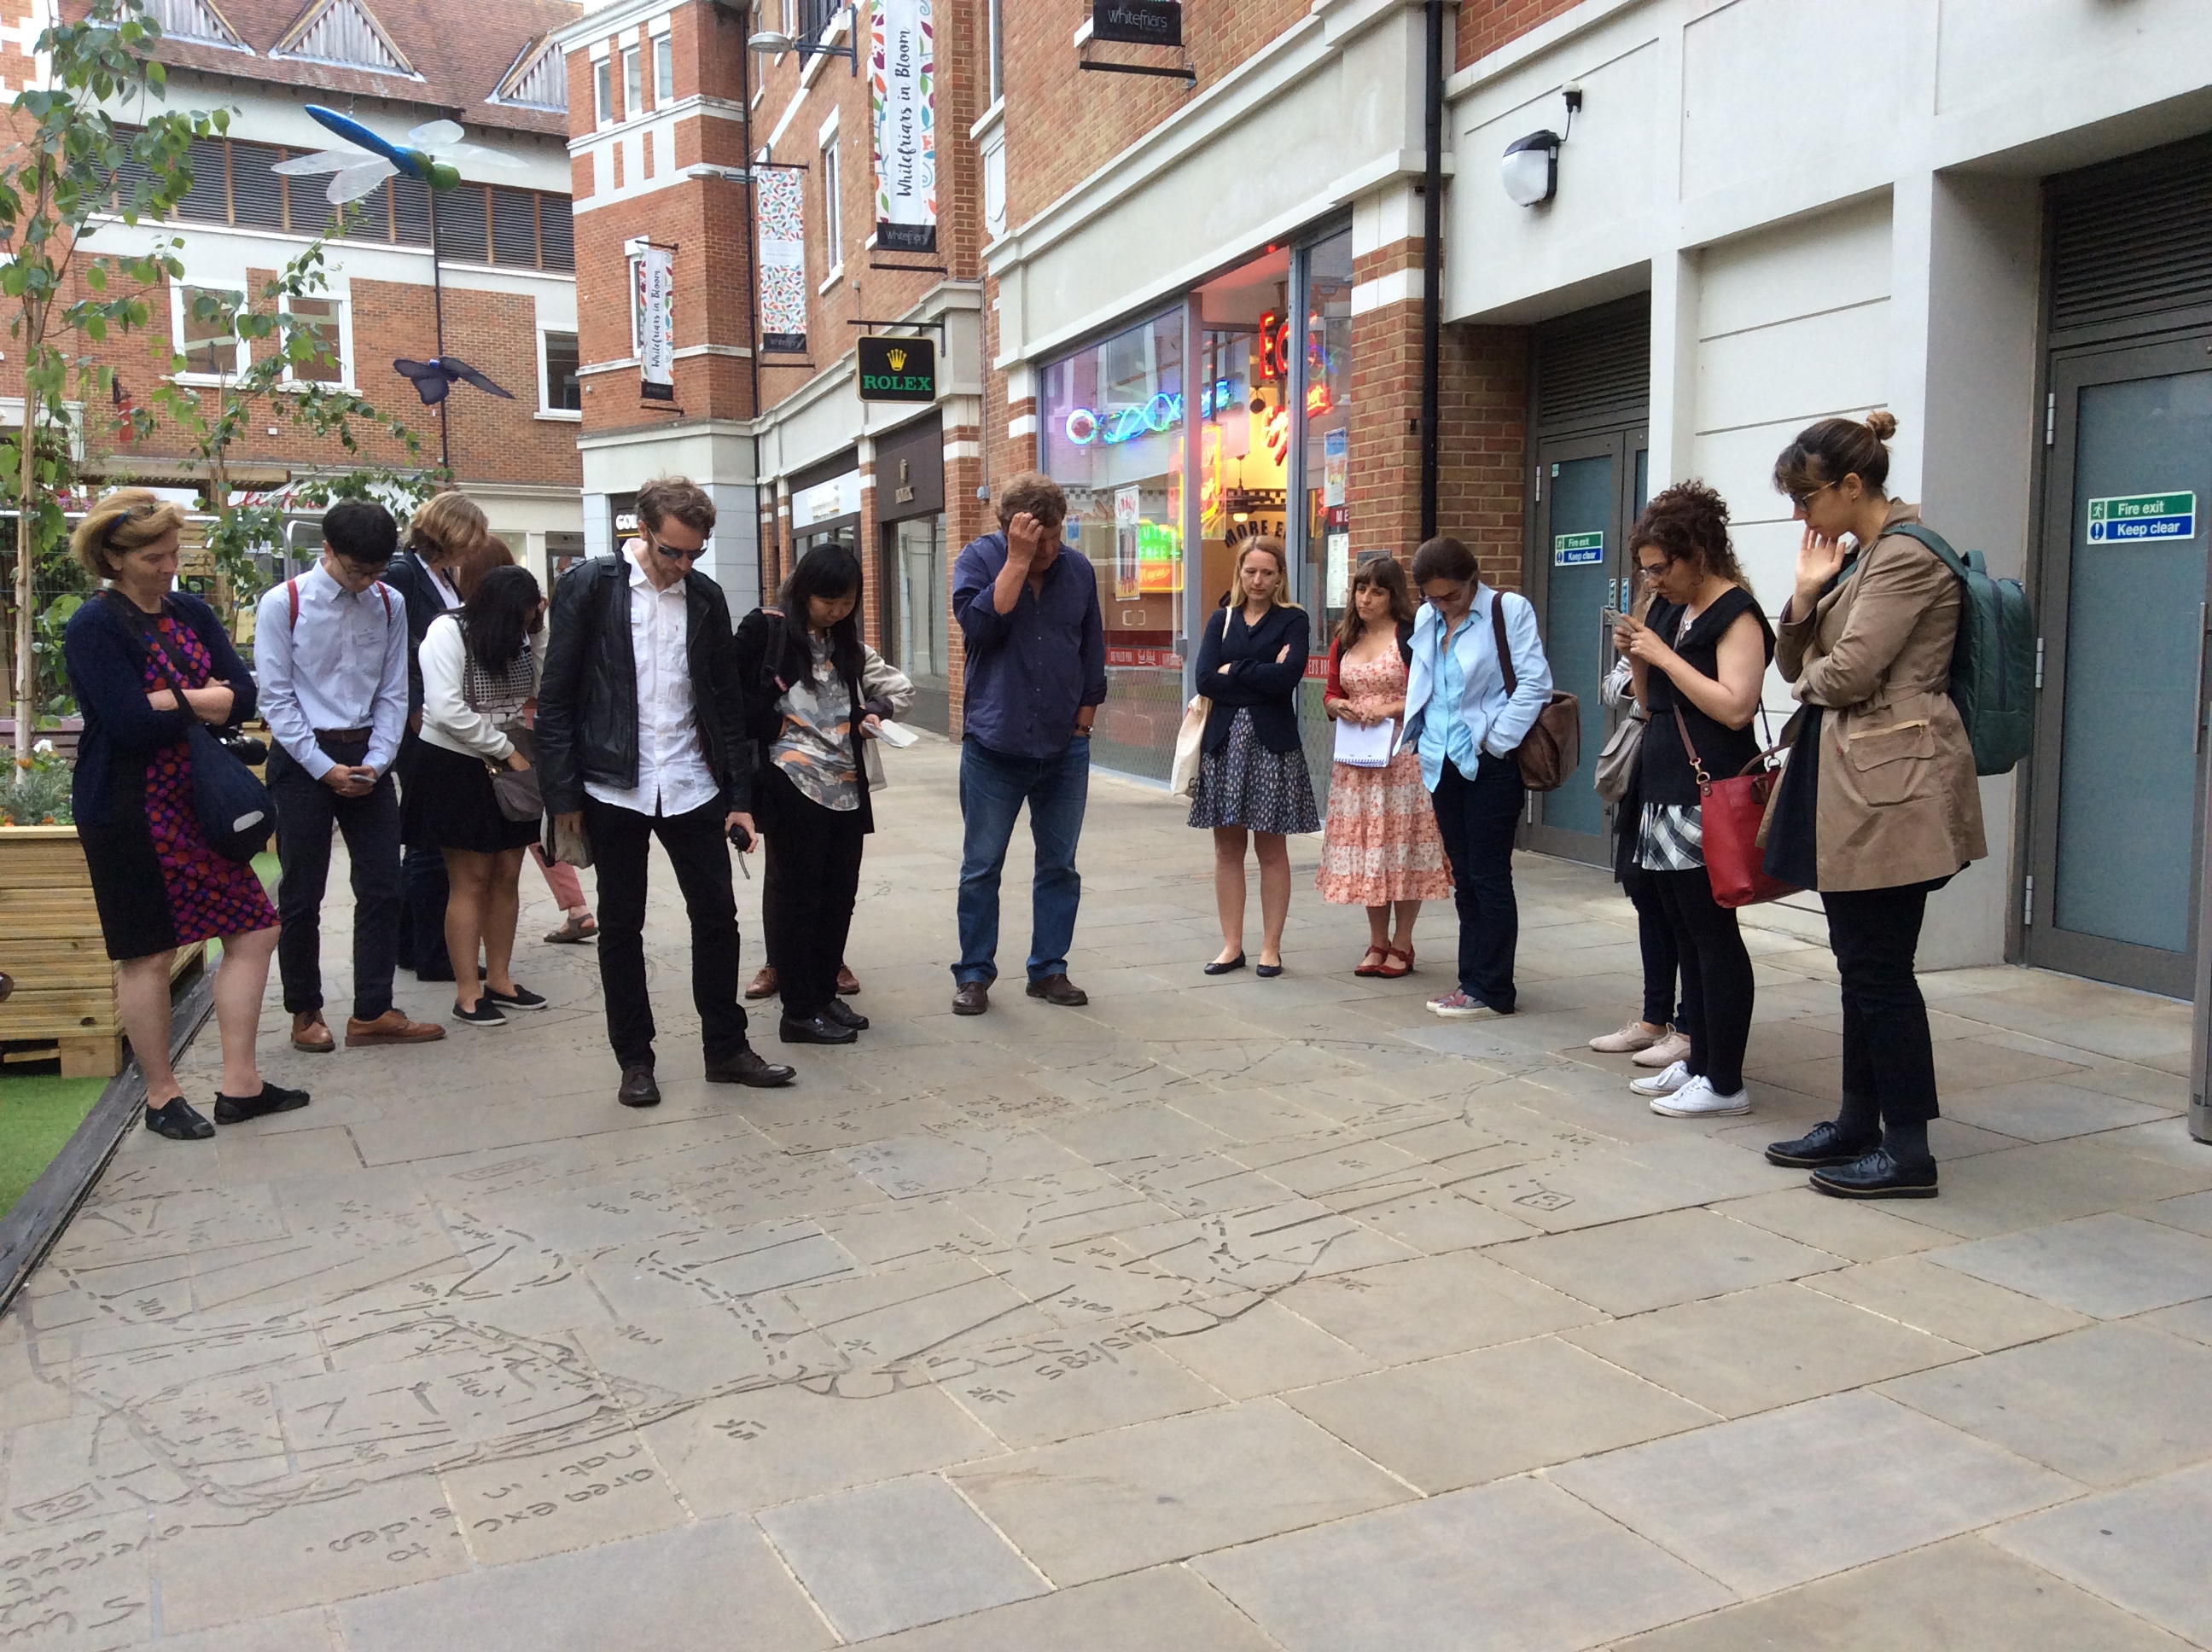 Guided Tour of Whitefriars Shopping Centre (led by Canterbury Archaeological Trust)